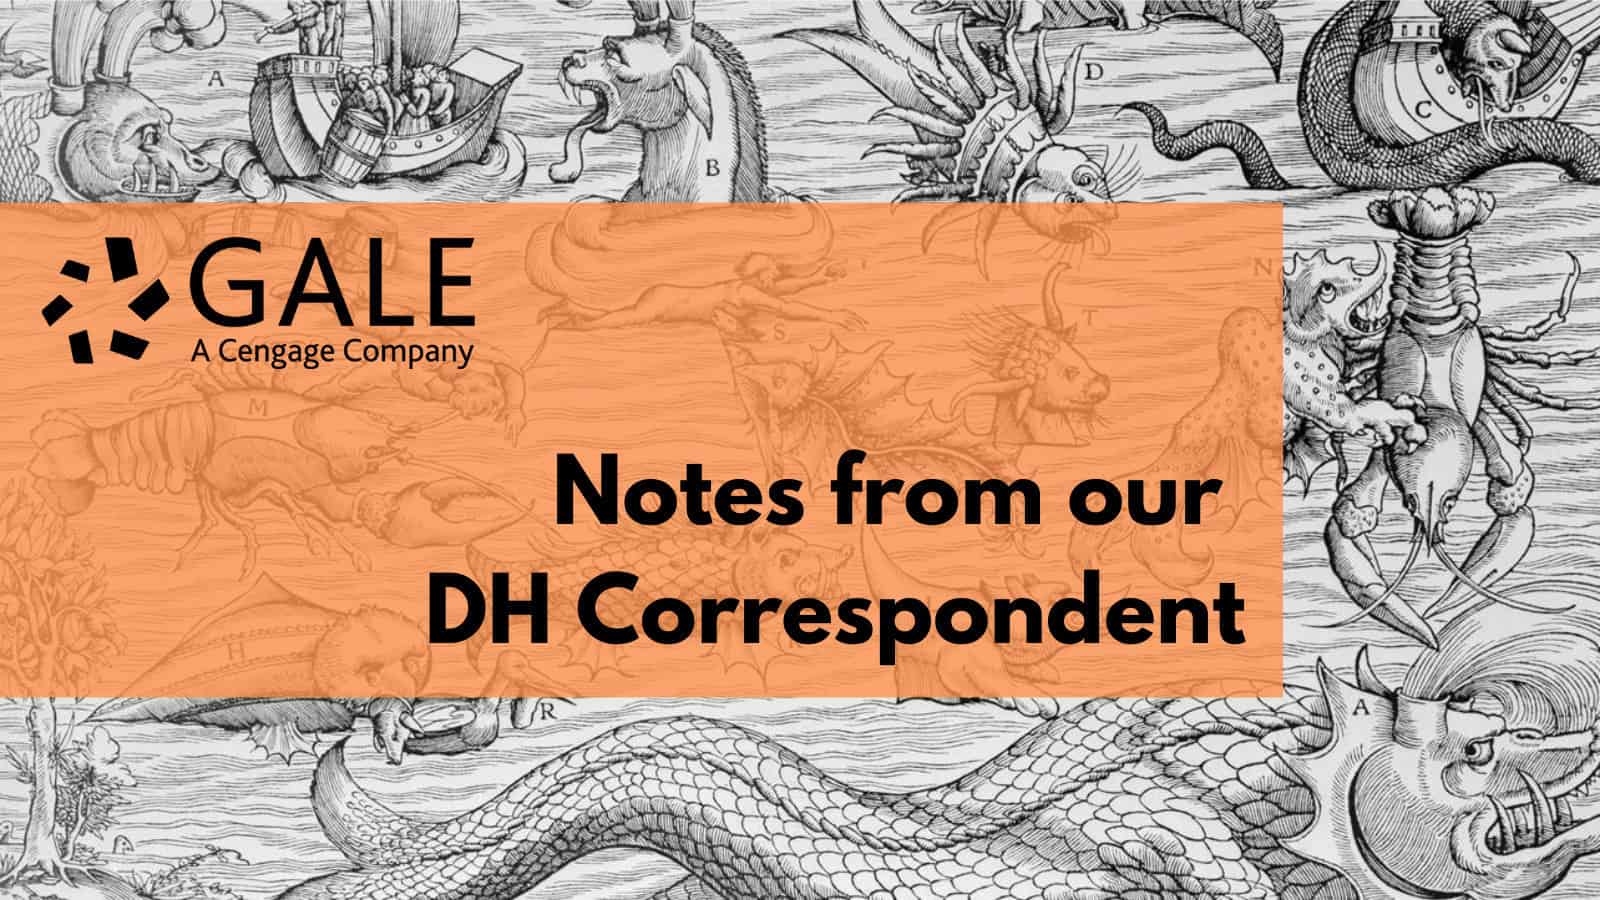 Notes from our DH correspondent design